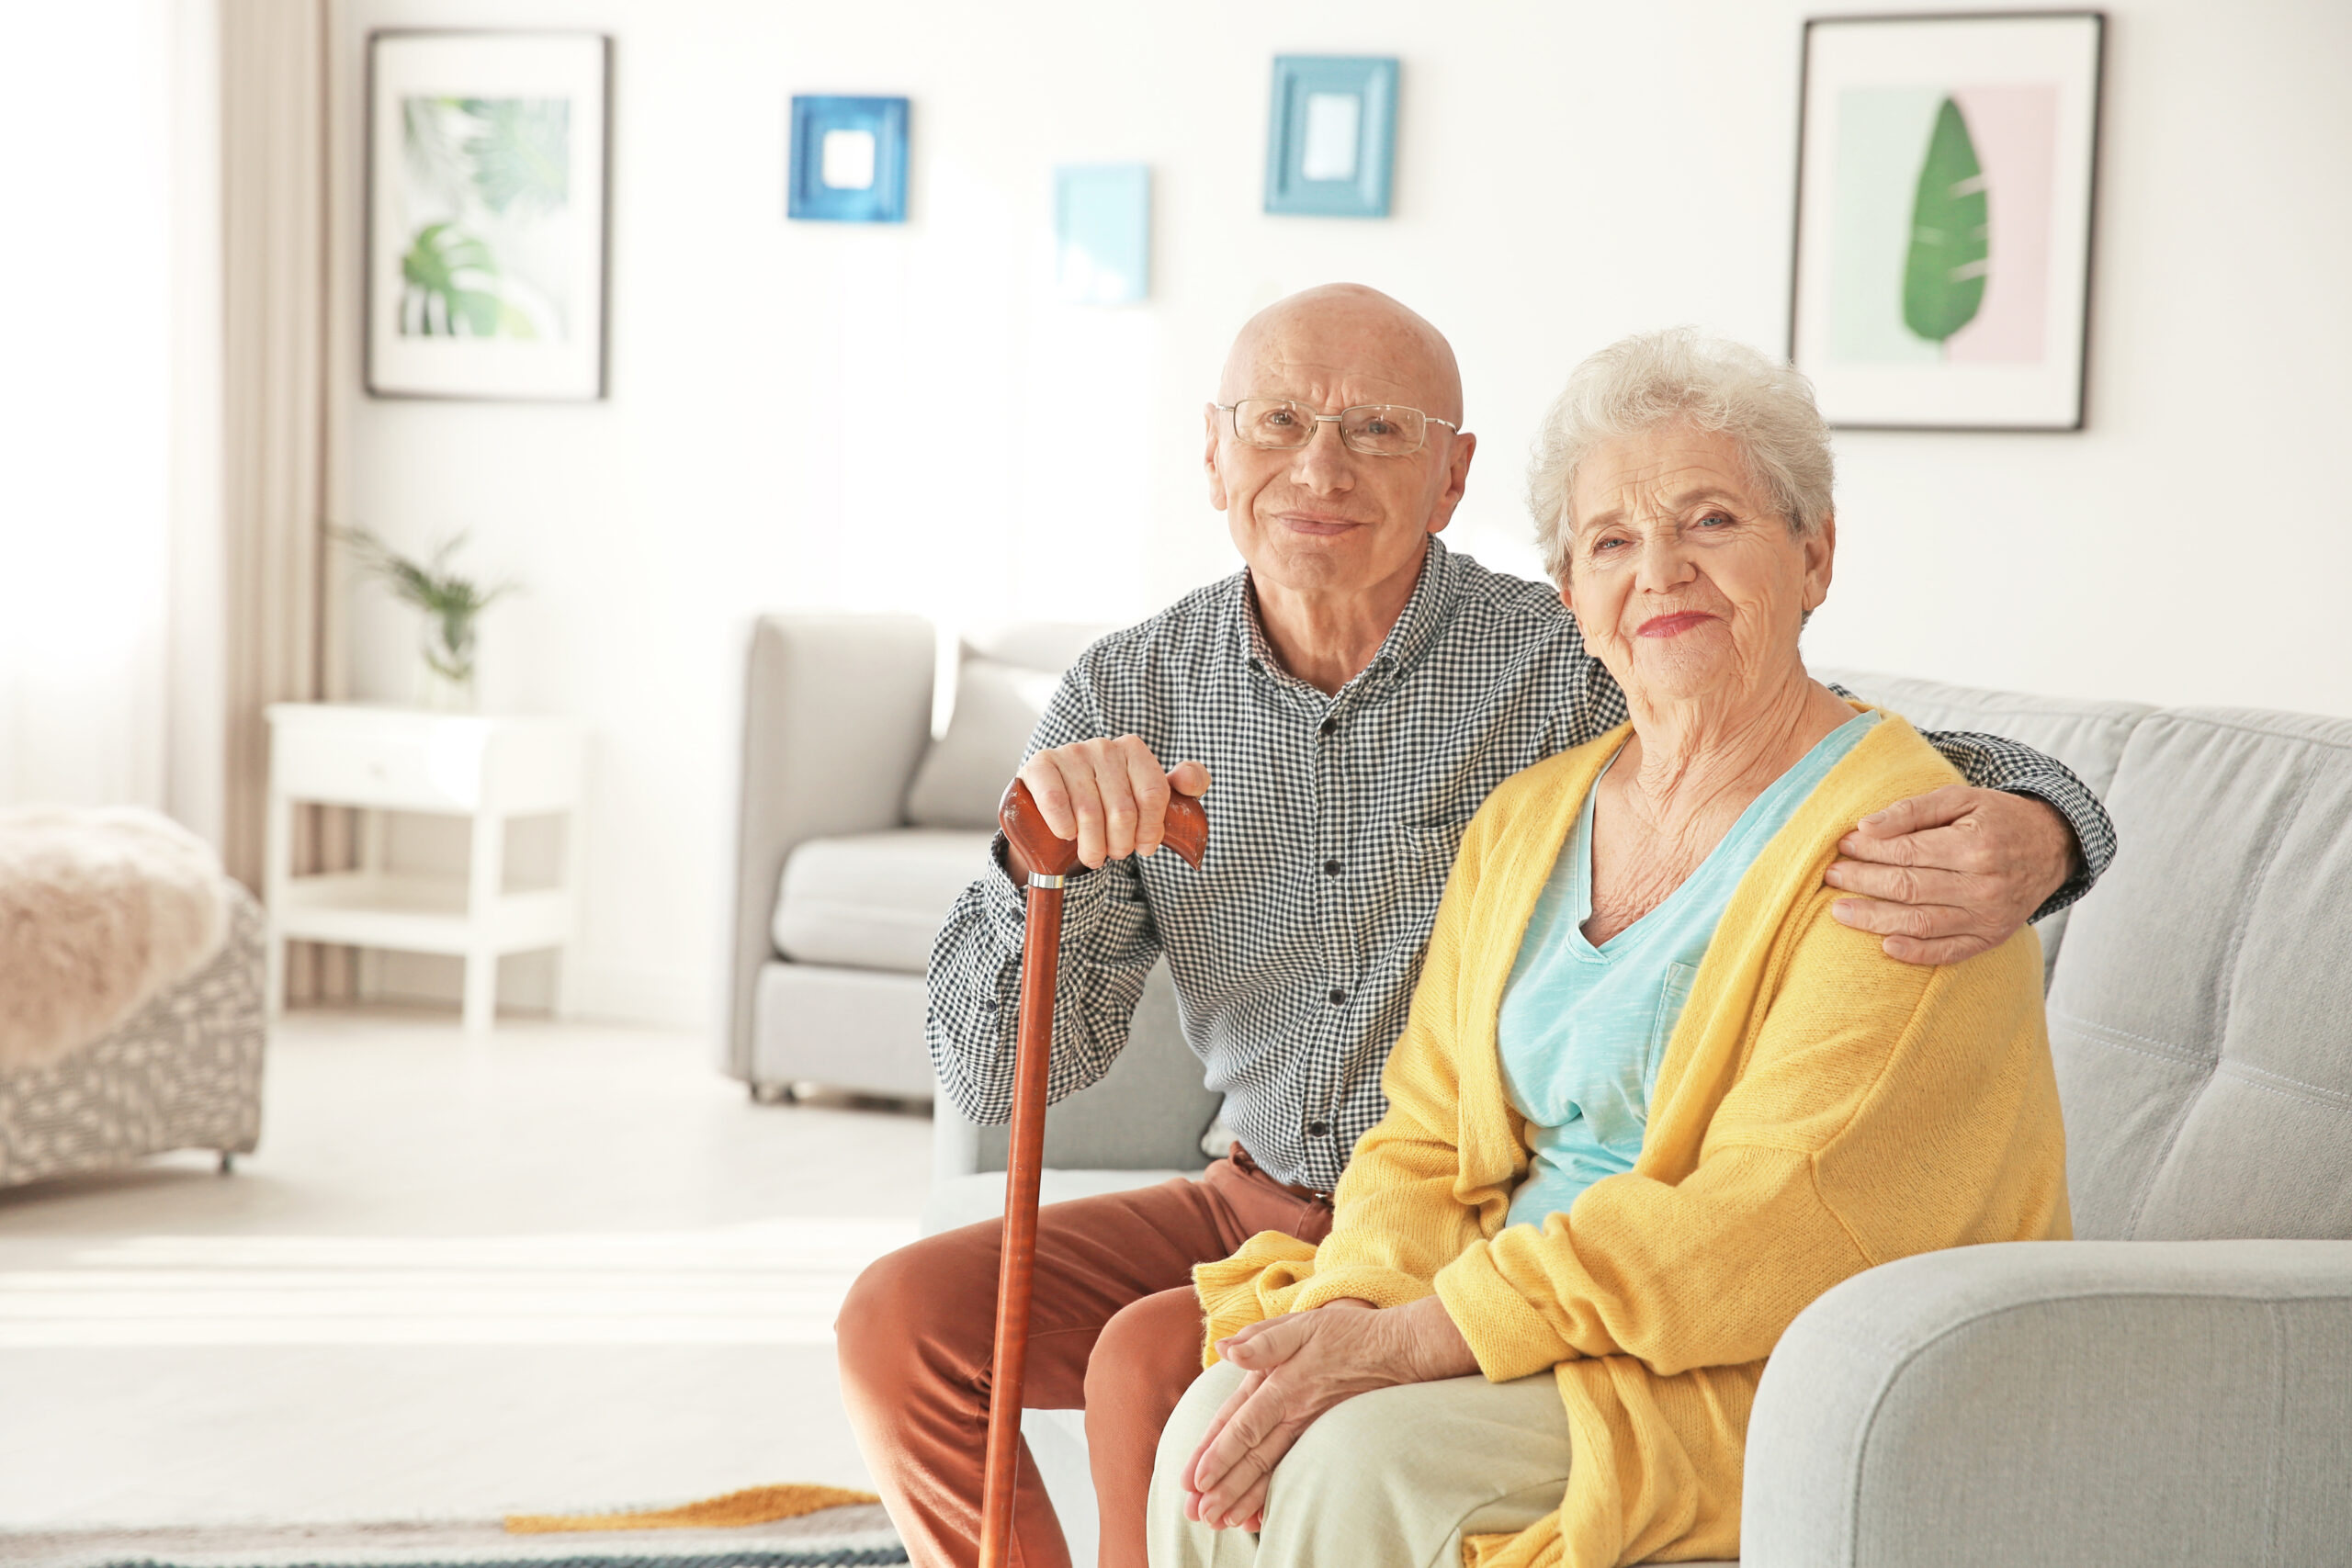 Elderly couple sitting on couch in living room